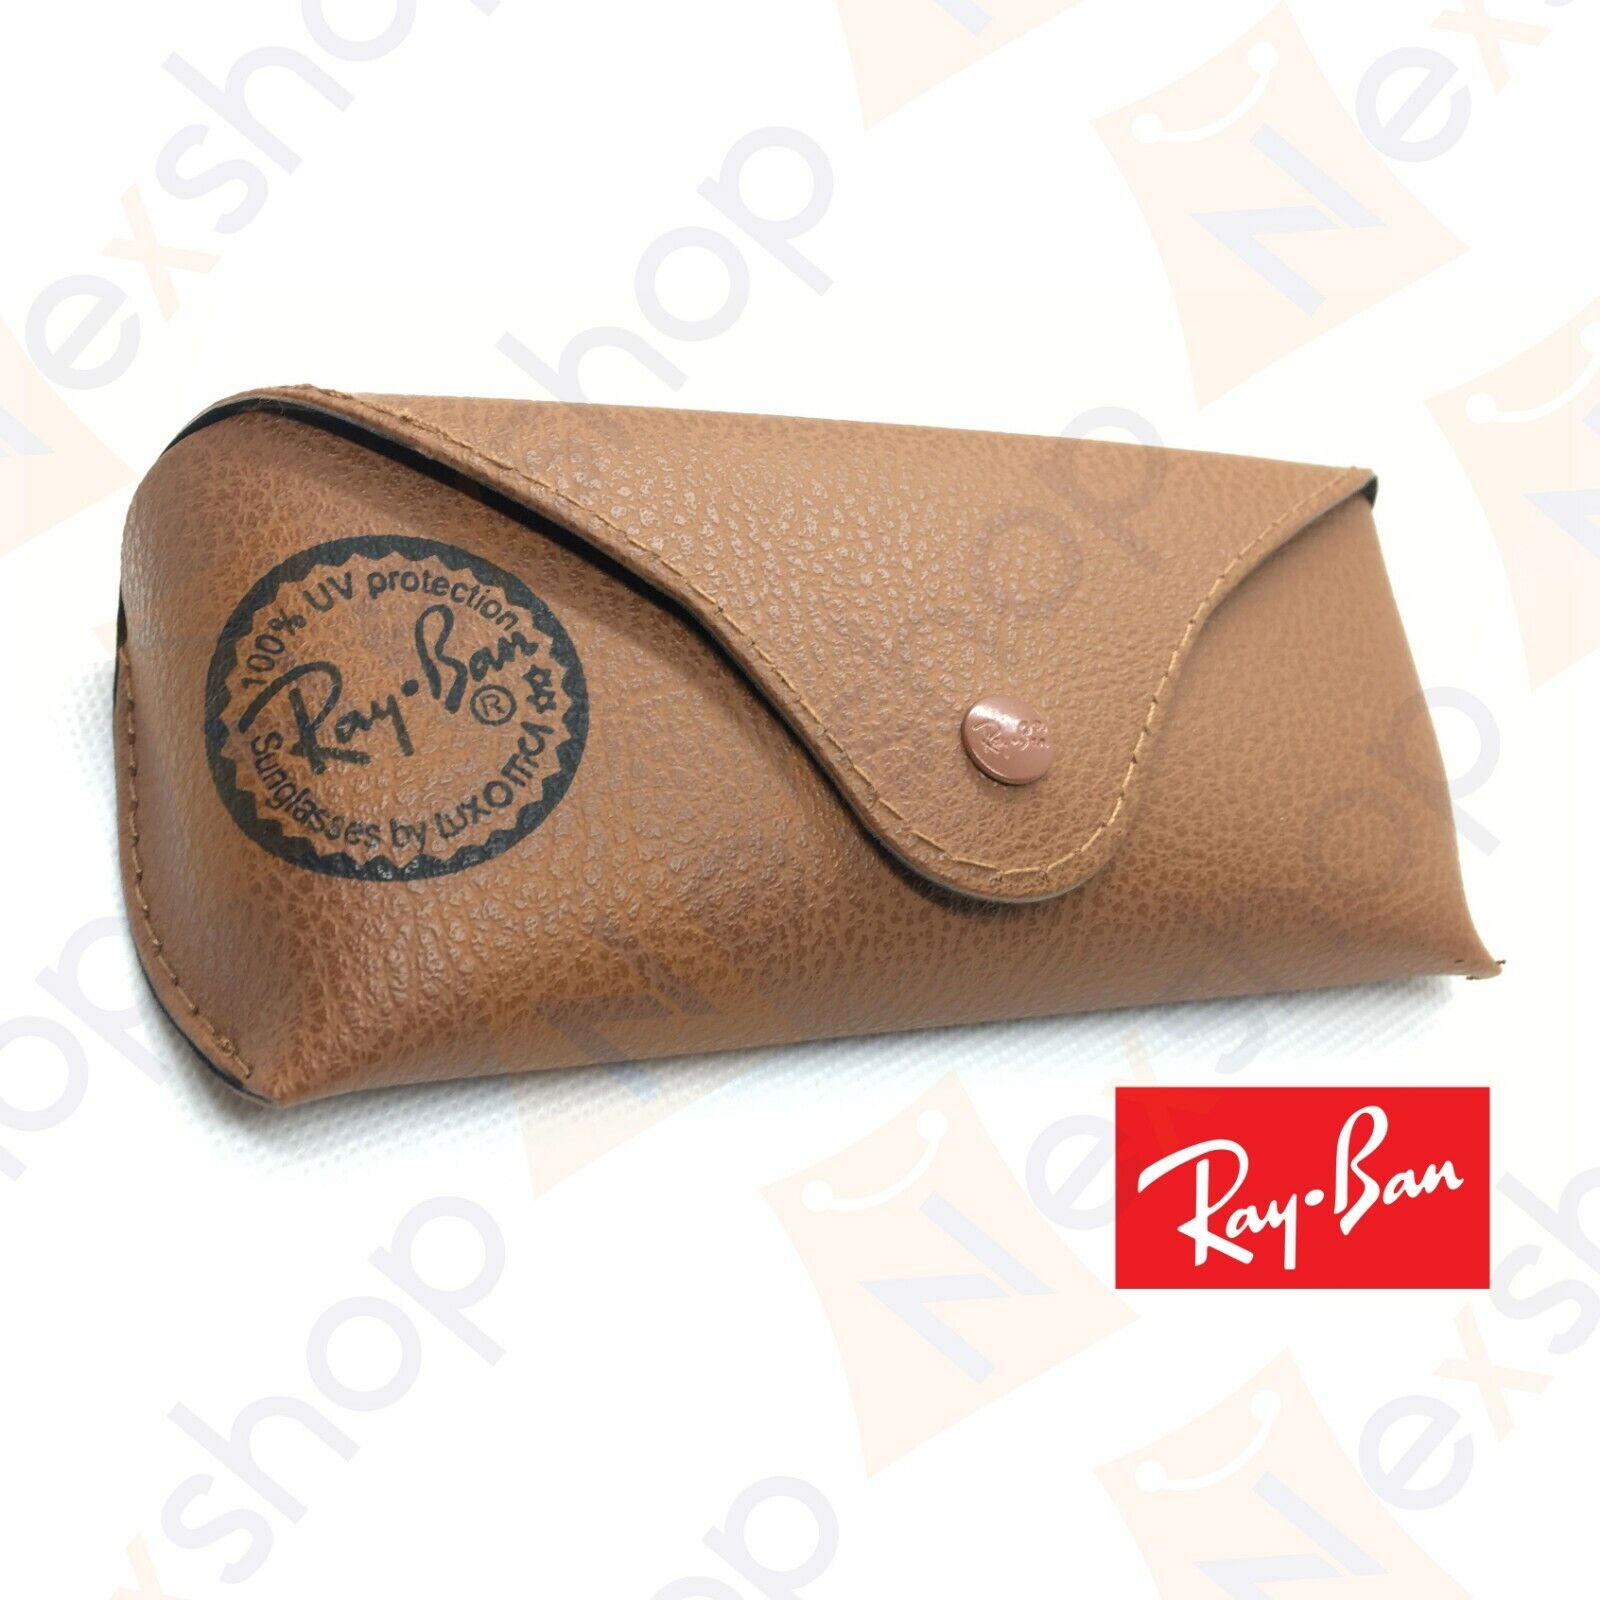 Rayban Sunglasses Eyeglasses Soft Leather Brown Case w/ Cleaning Cloth & GiftBox